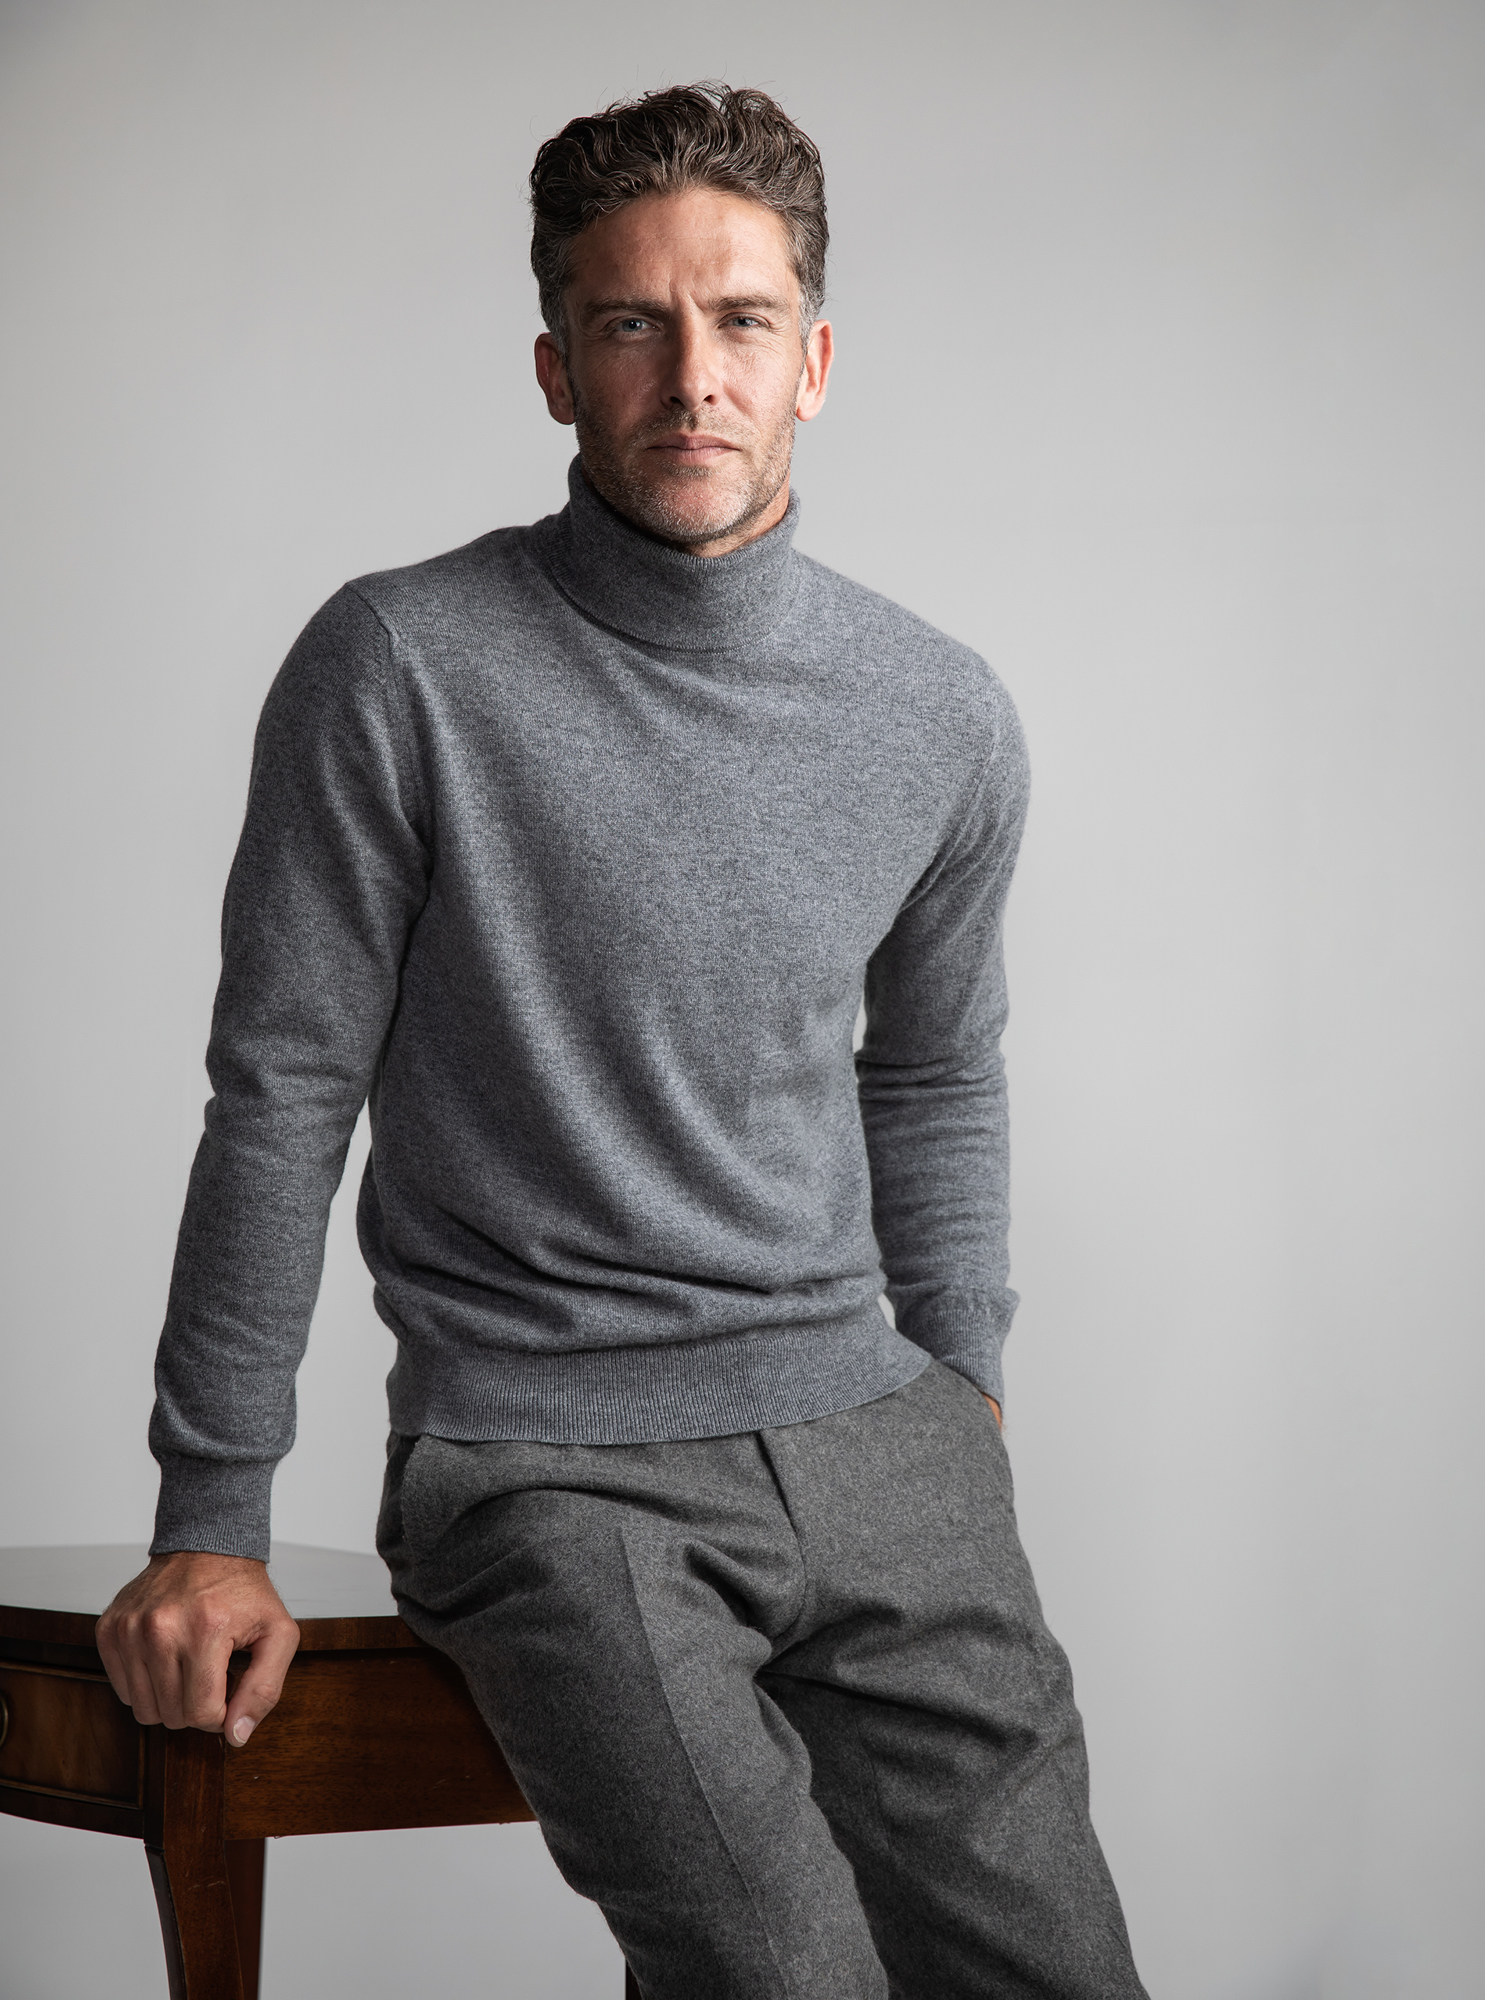 Johnstons of Elgin has refreshed the design of its modern classics, from the cashmere roll-neck to crew necks and accessories